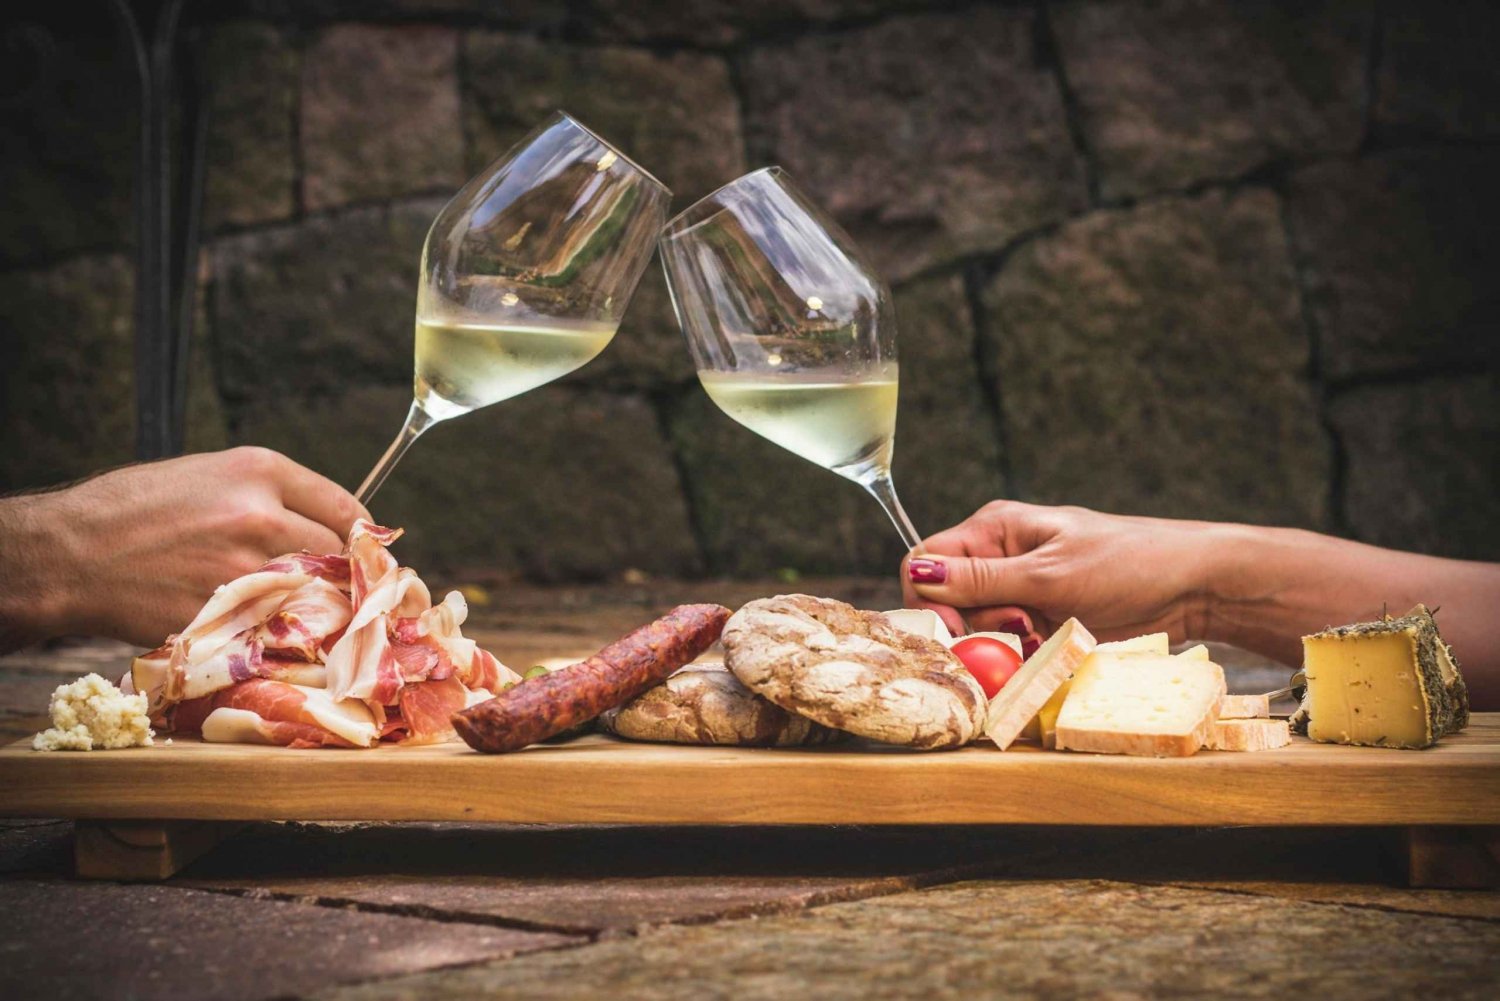 South Tyrolean specialties and wine tasting